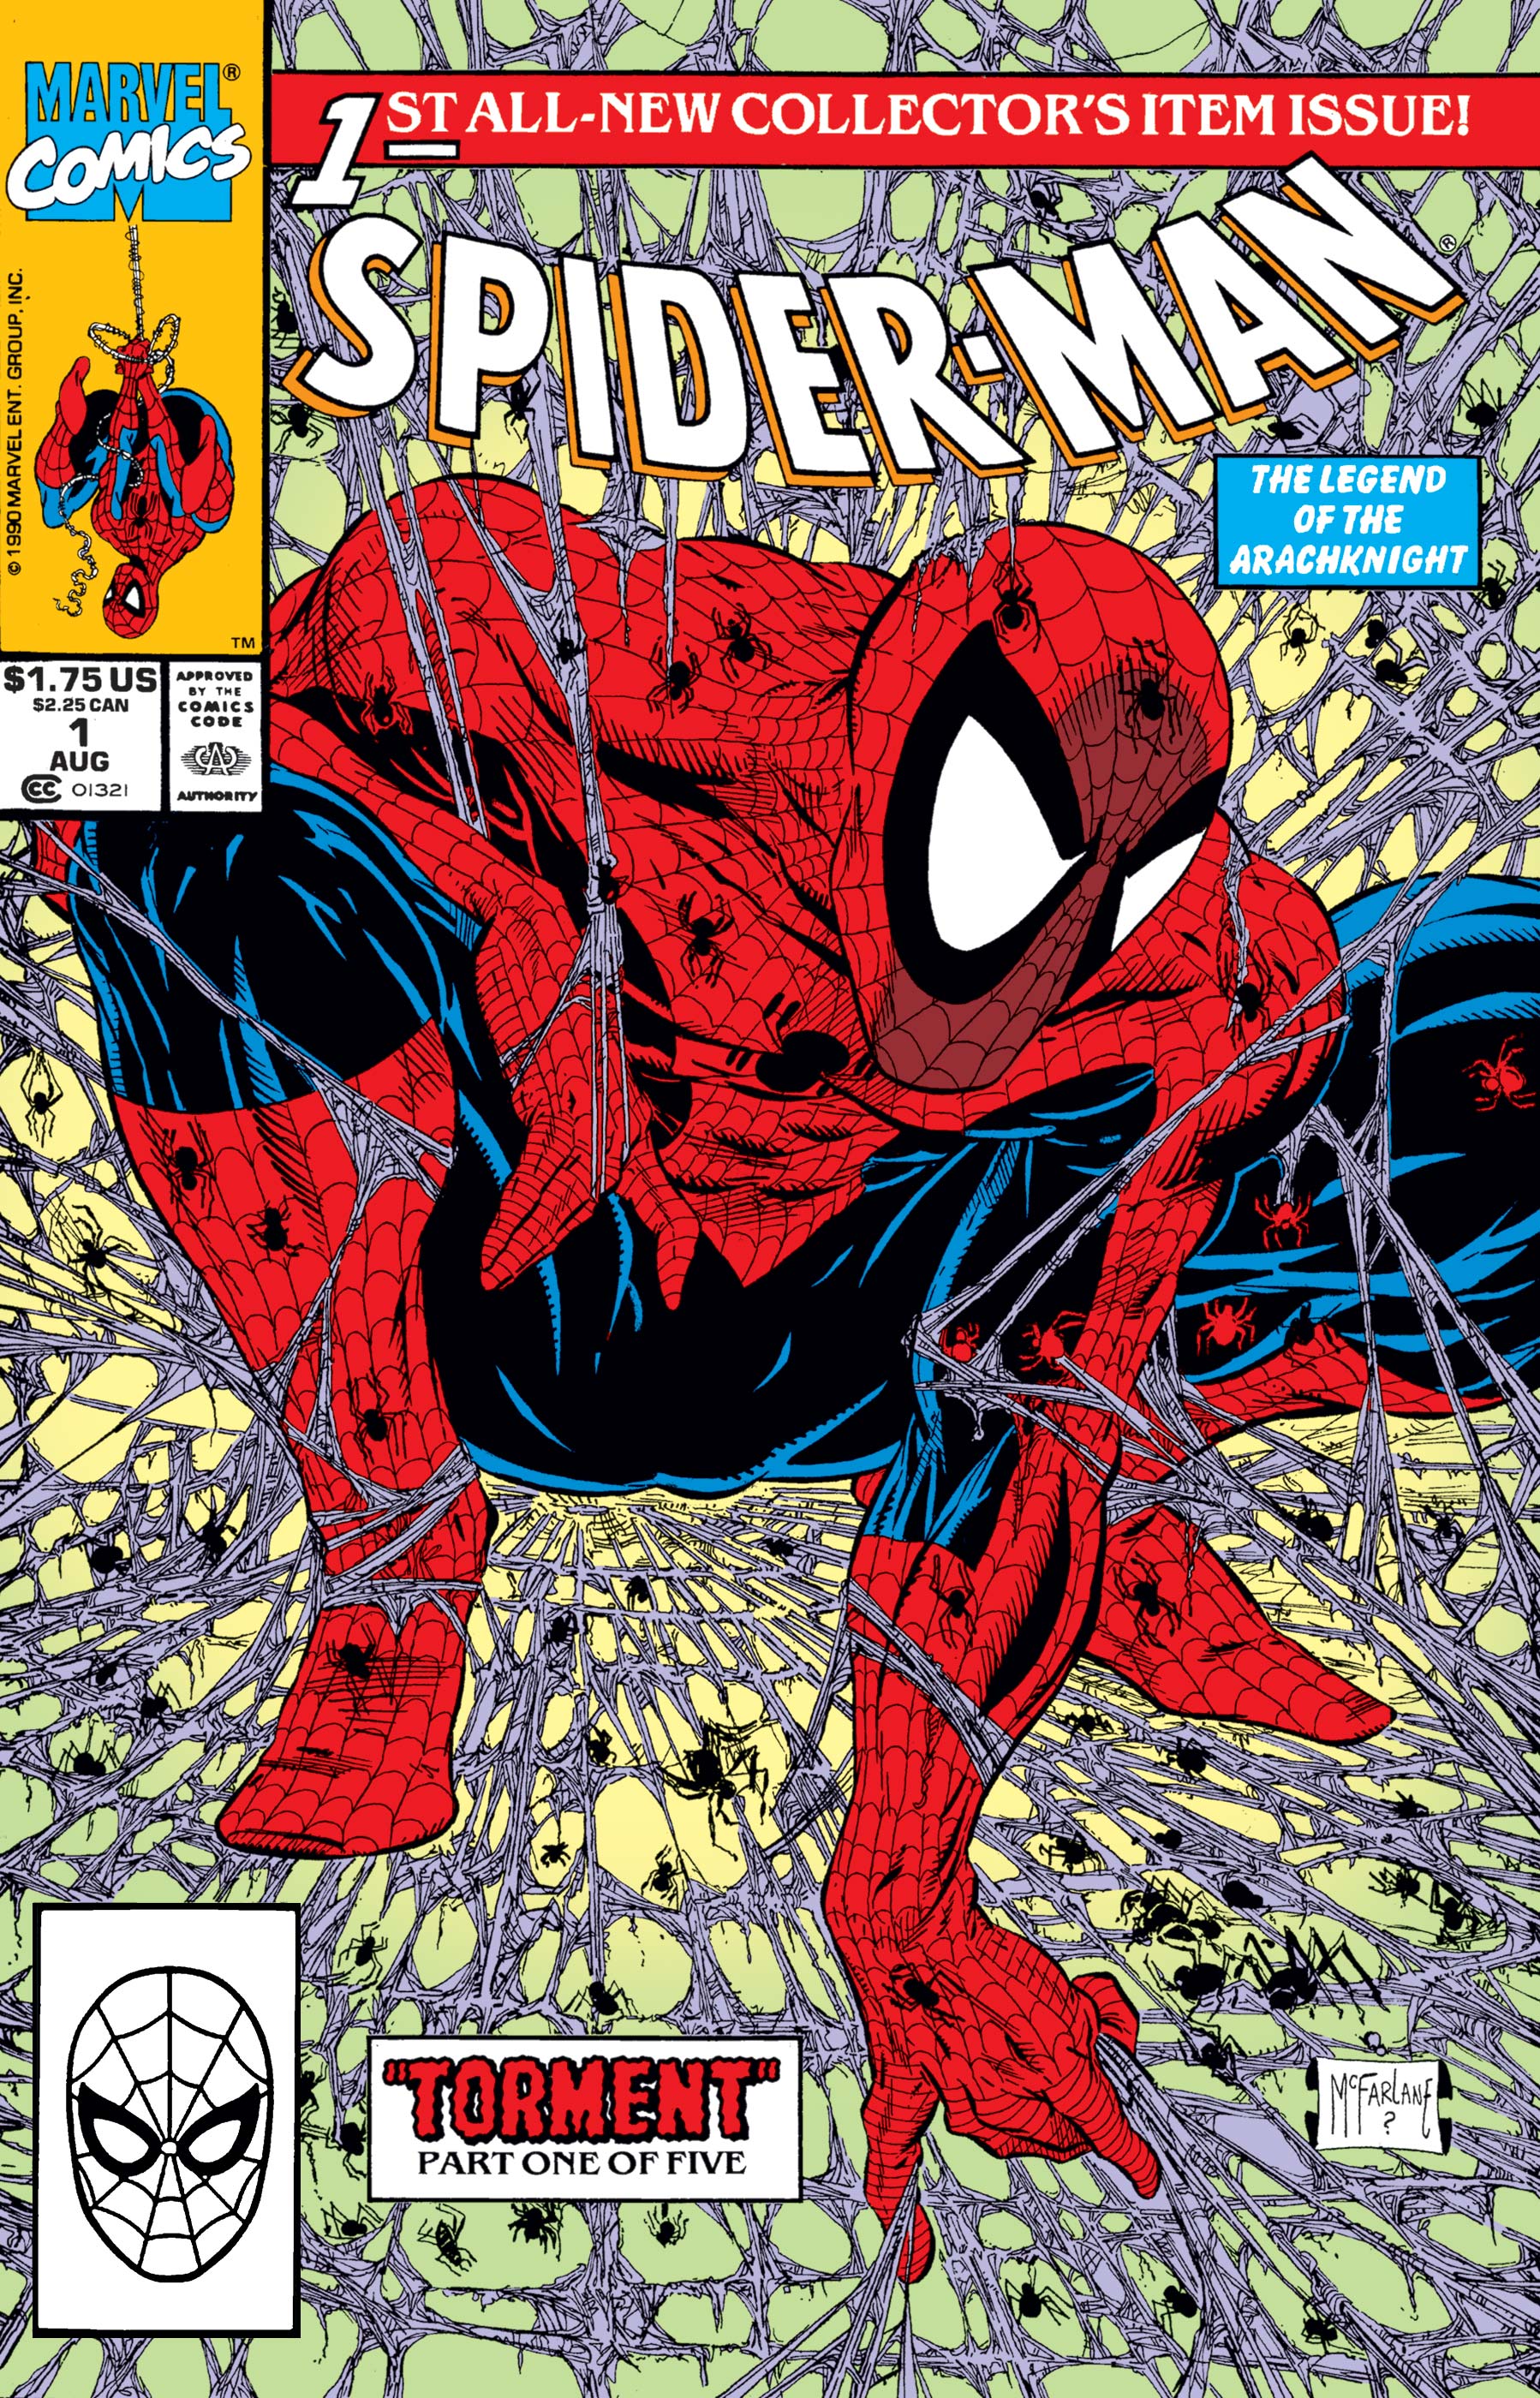 Judging by the Cover - Our favorite Spider-Man covers of all time